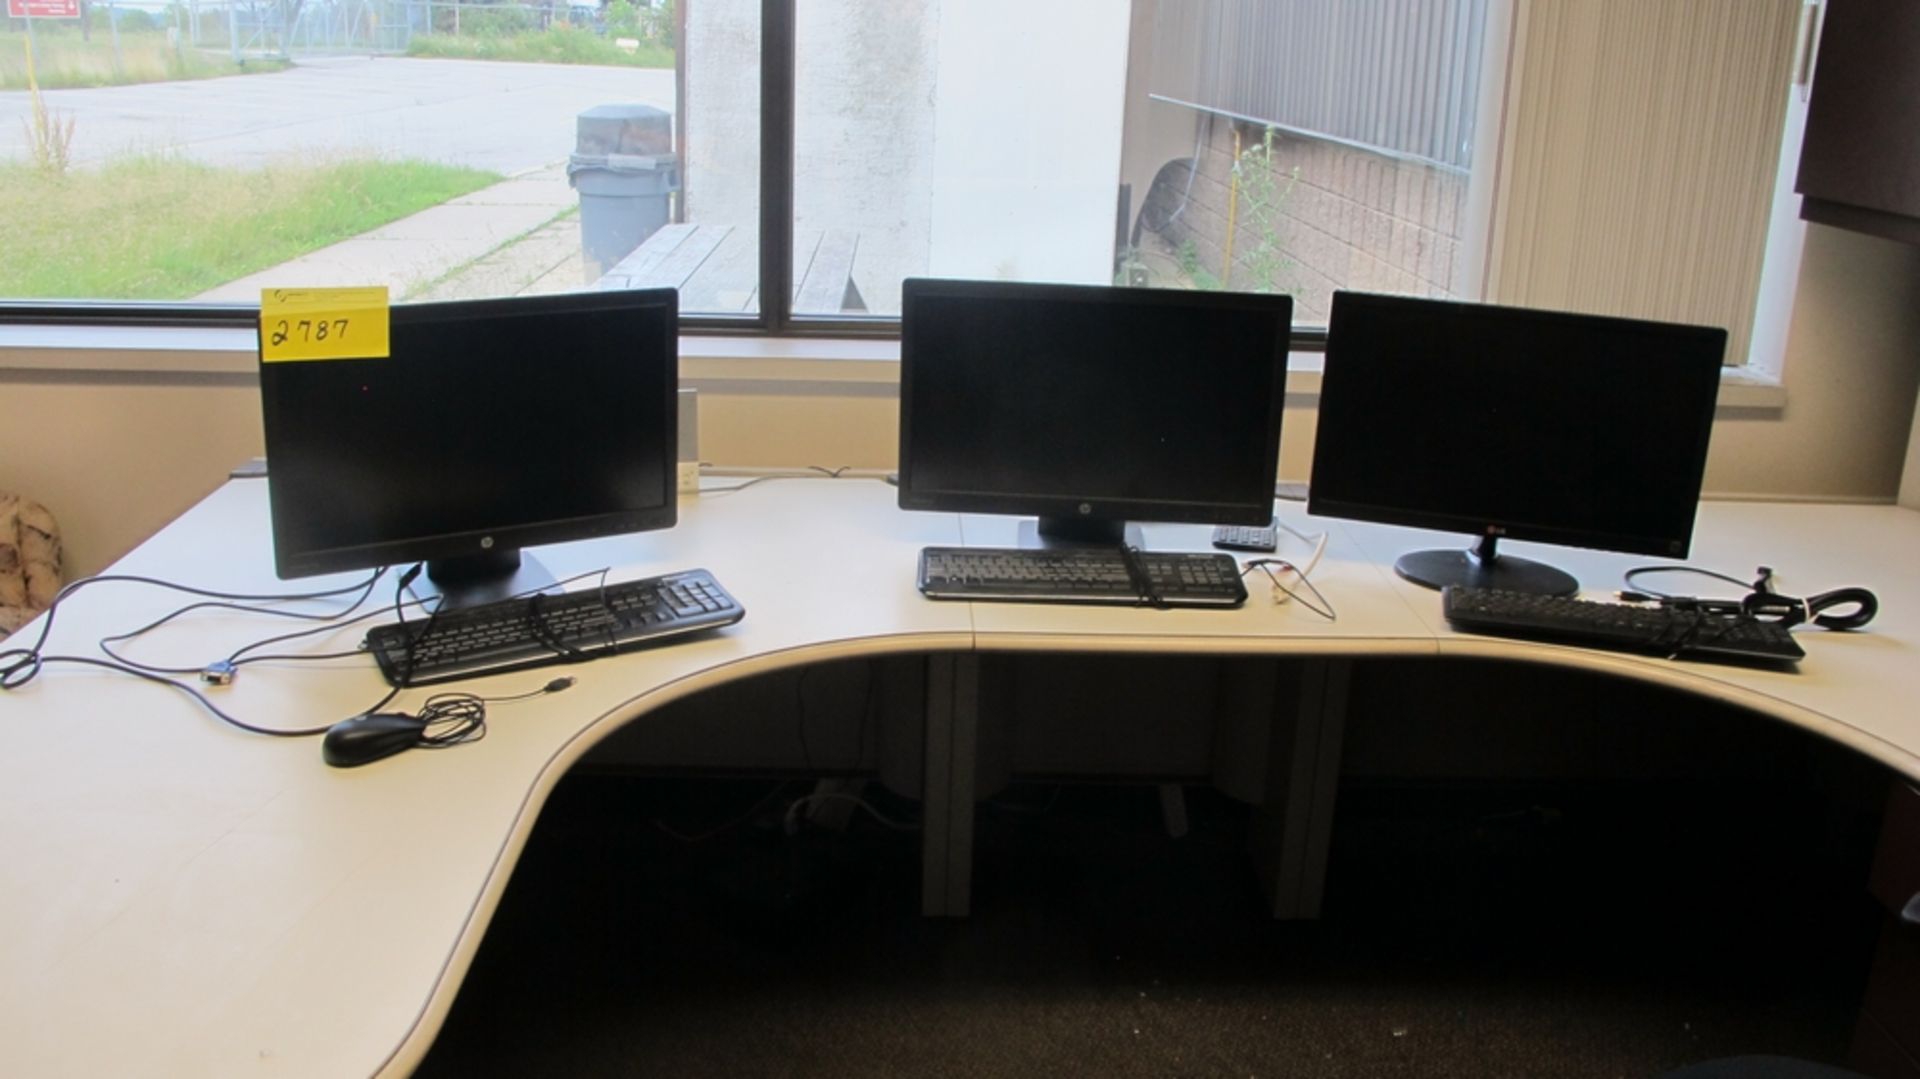 LOT OF 3 MONITORS, 3 KEYBOARDS AND 1 MOUSE (100 SHIRLEY AVE KITCHENER)